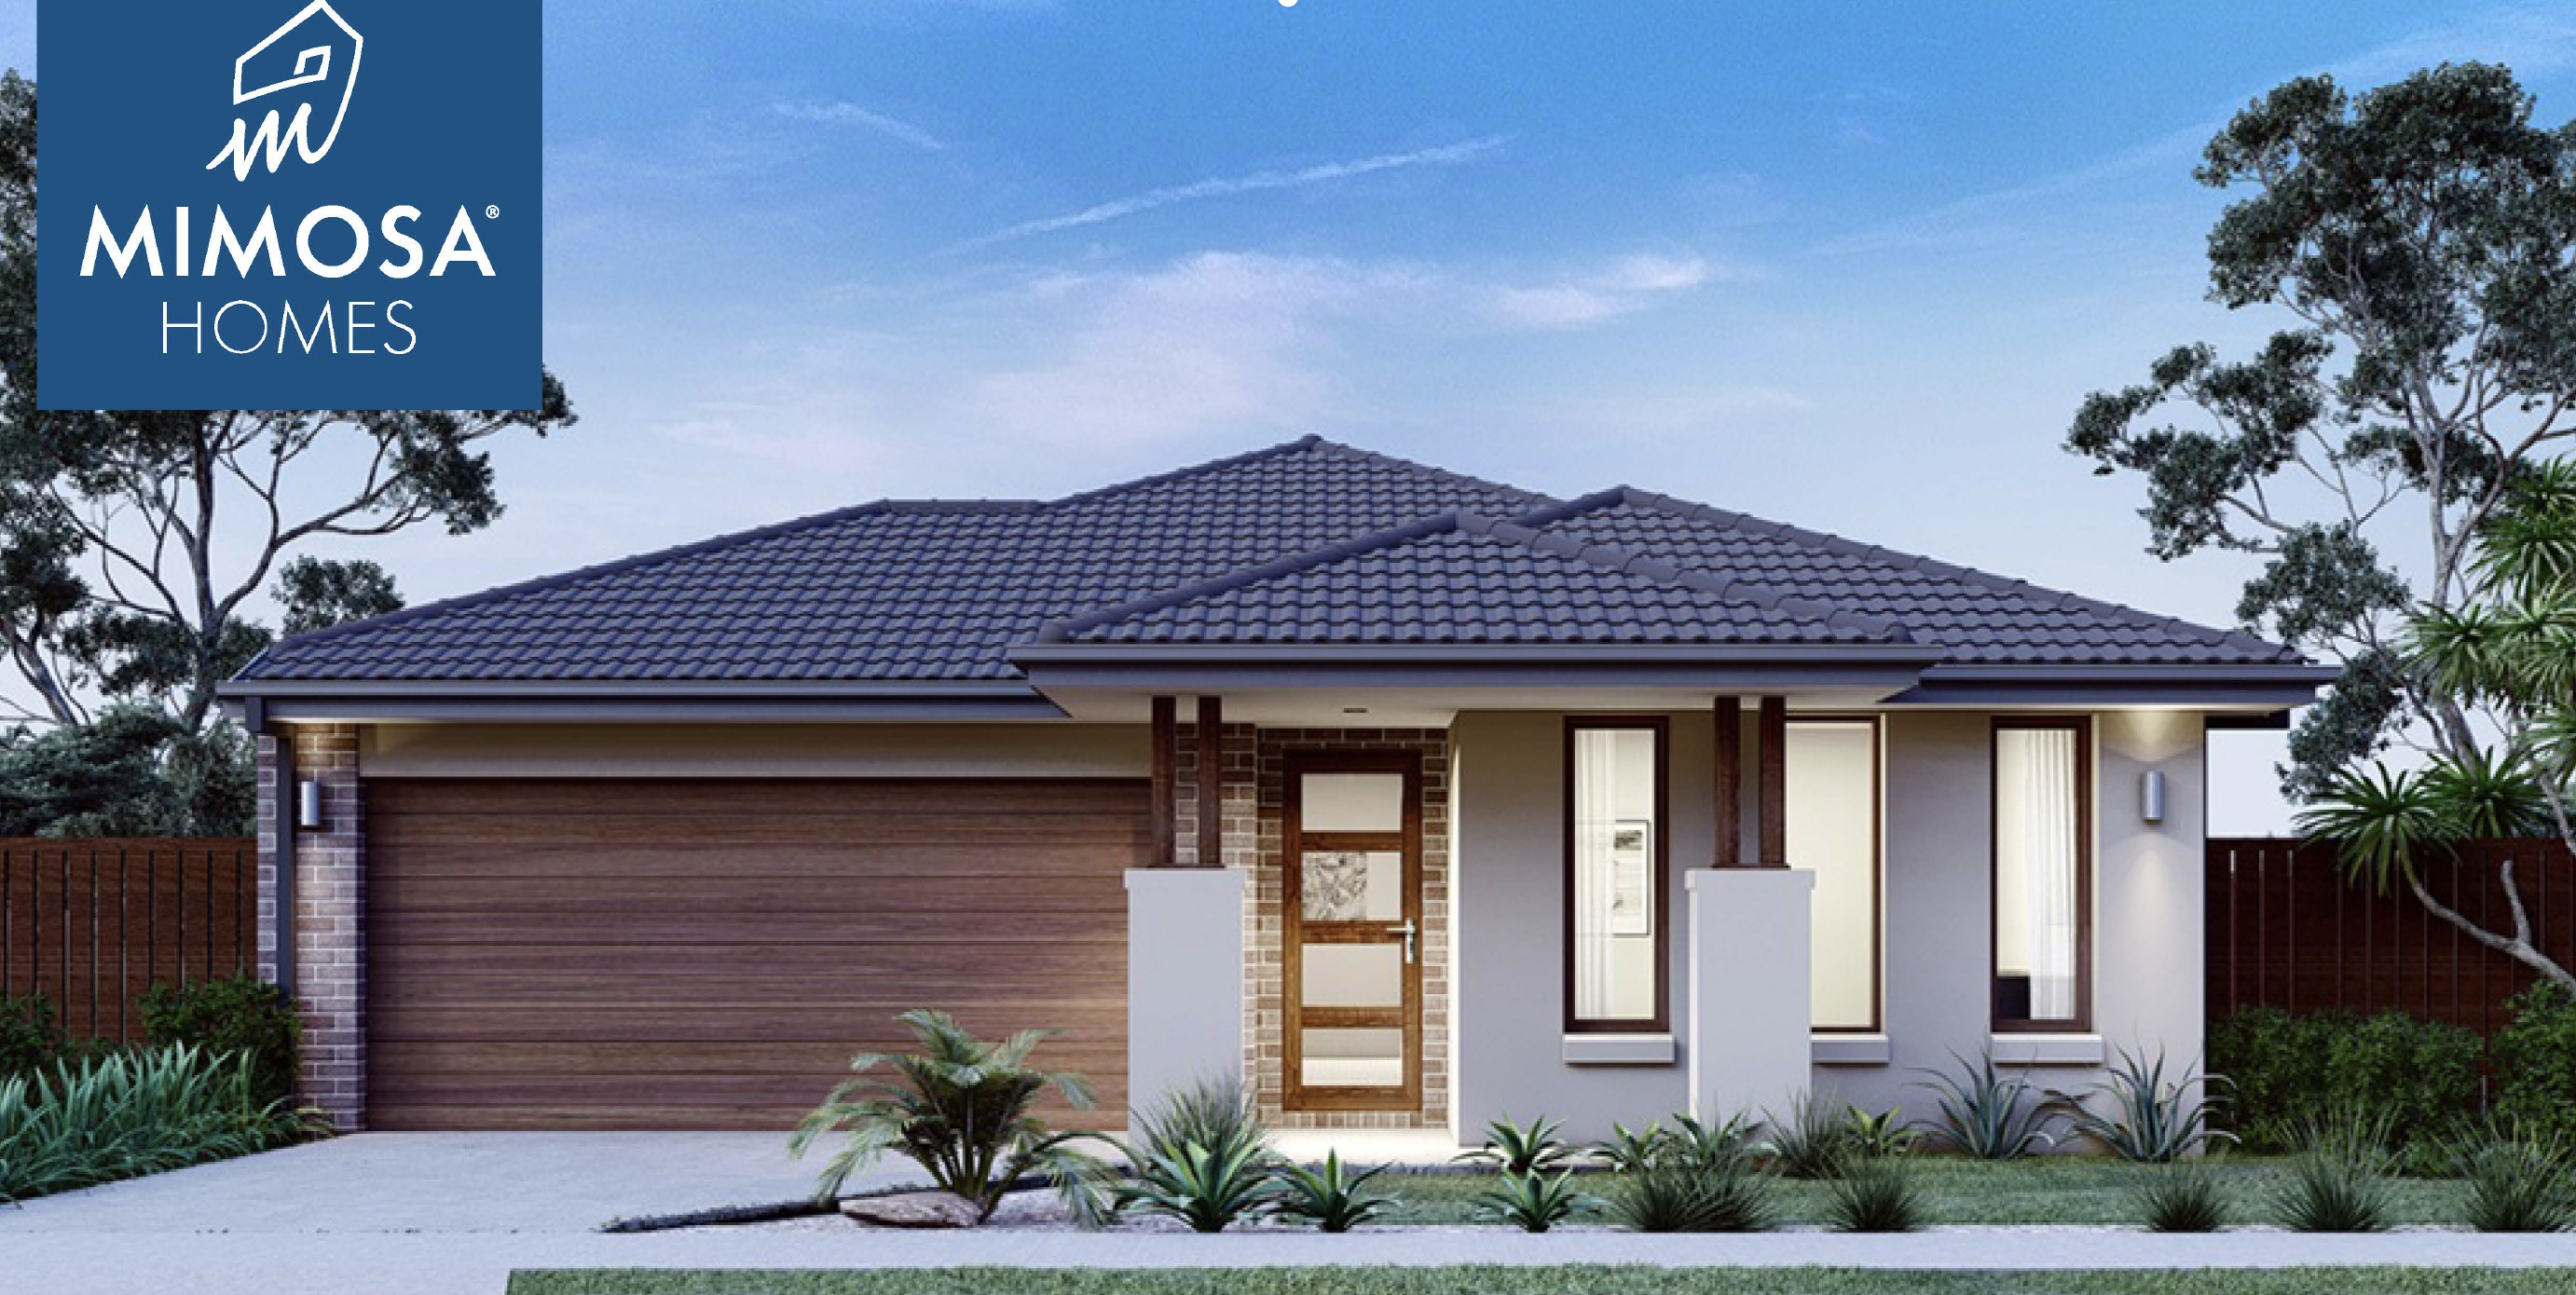 House and Land Packages starting from $577K